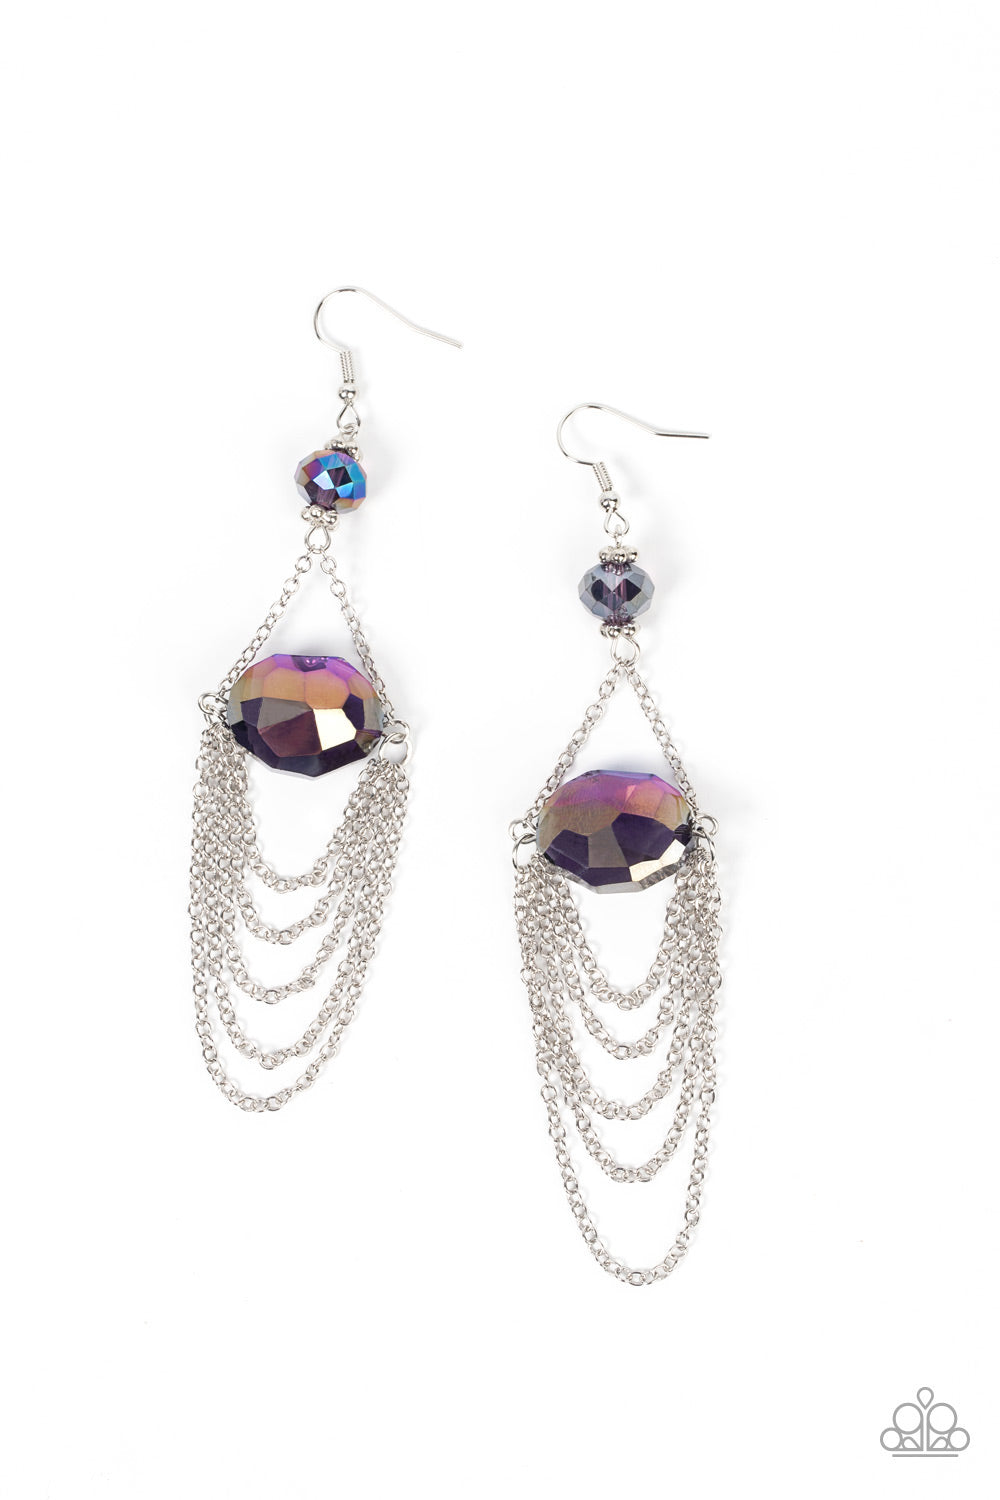 Ethereally Extravagant - Purple Iridescent Gem Earrings tiers of dainty silver chains delicately layer from an oversized oval iridescent purple gem that is suspended from a faceted matching purple crystal-like bead, resulting in an ethereal chandelier. Earring attaches to a standard fishhook fitting.  Sold as one pair of earrings.